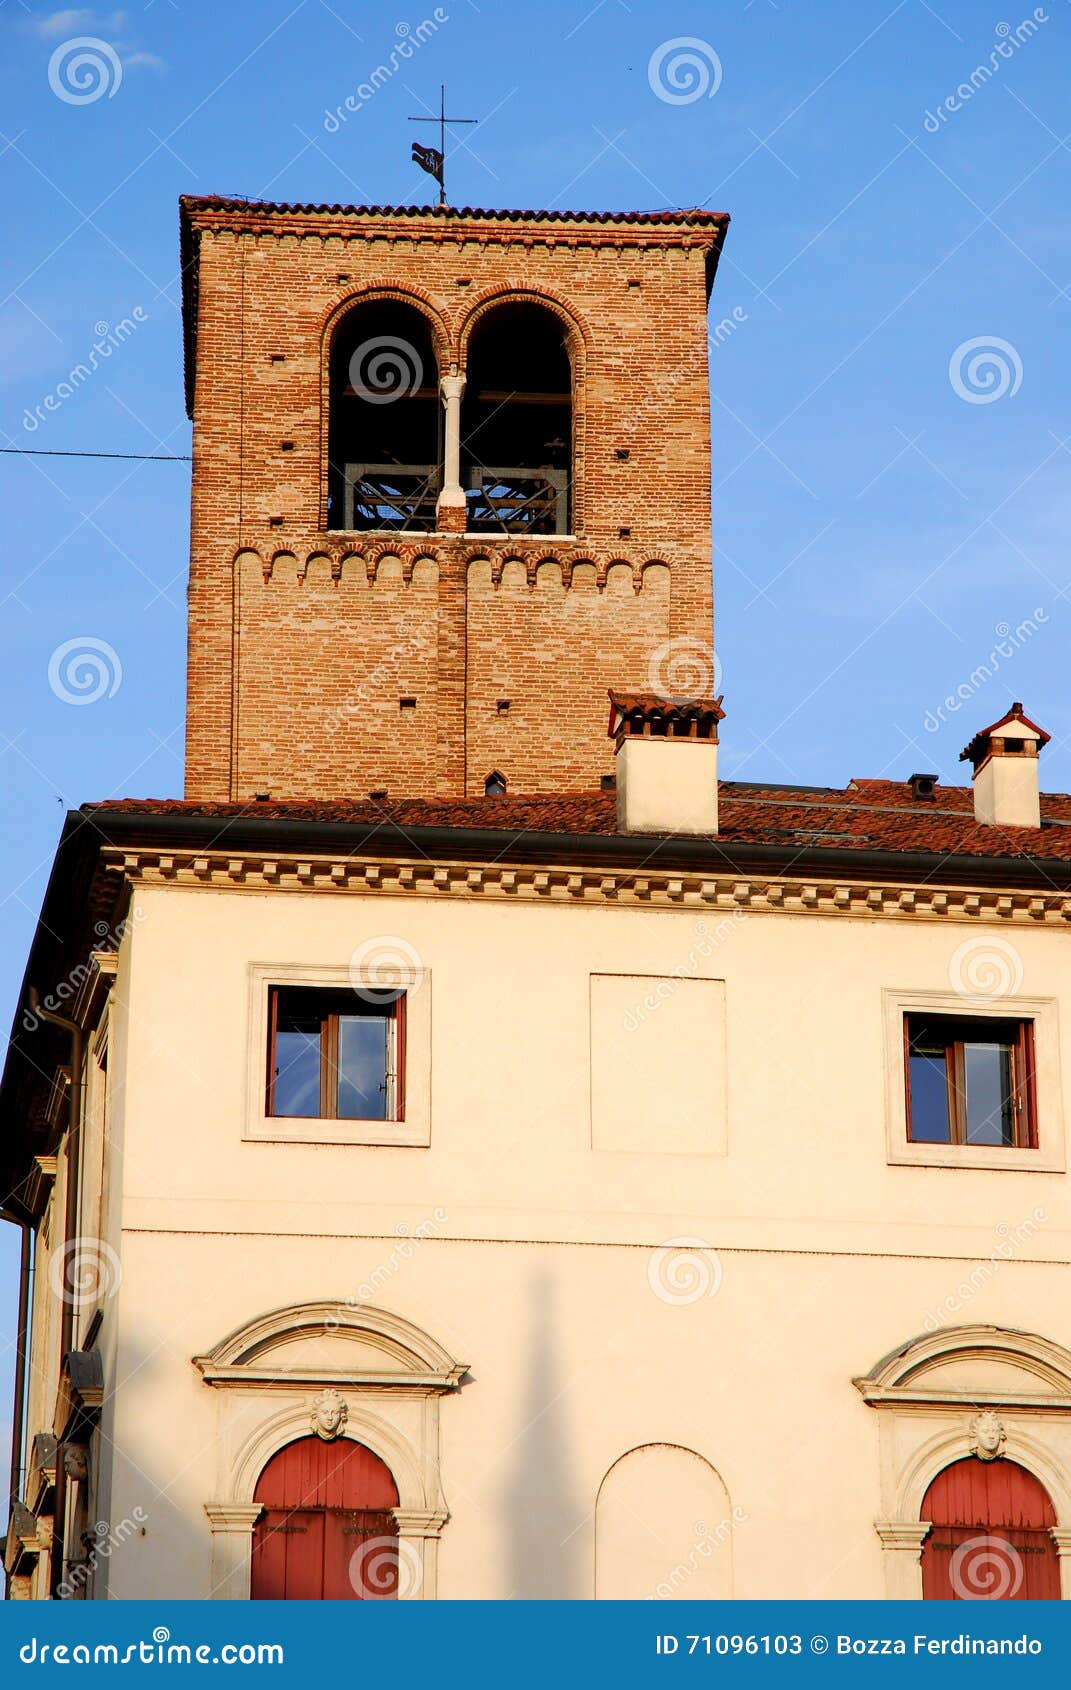 palace and medieval tower in vicenza in veneto (italy)